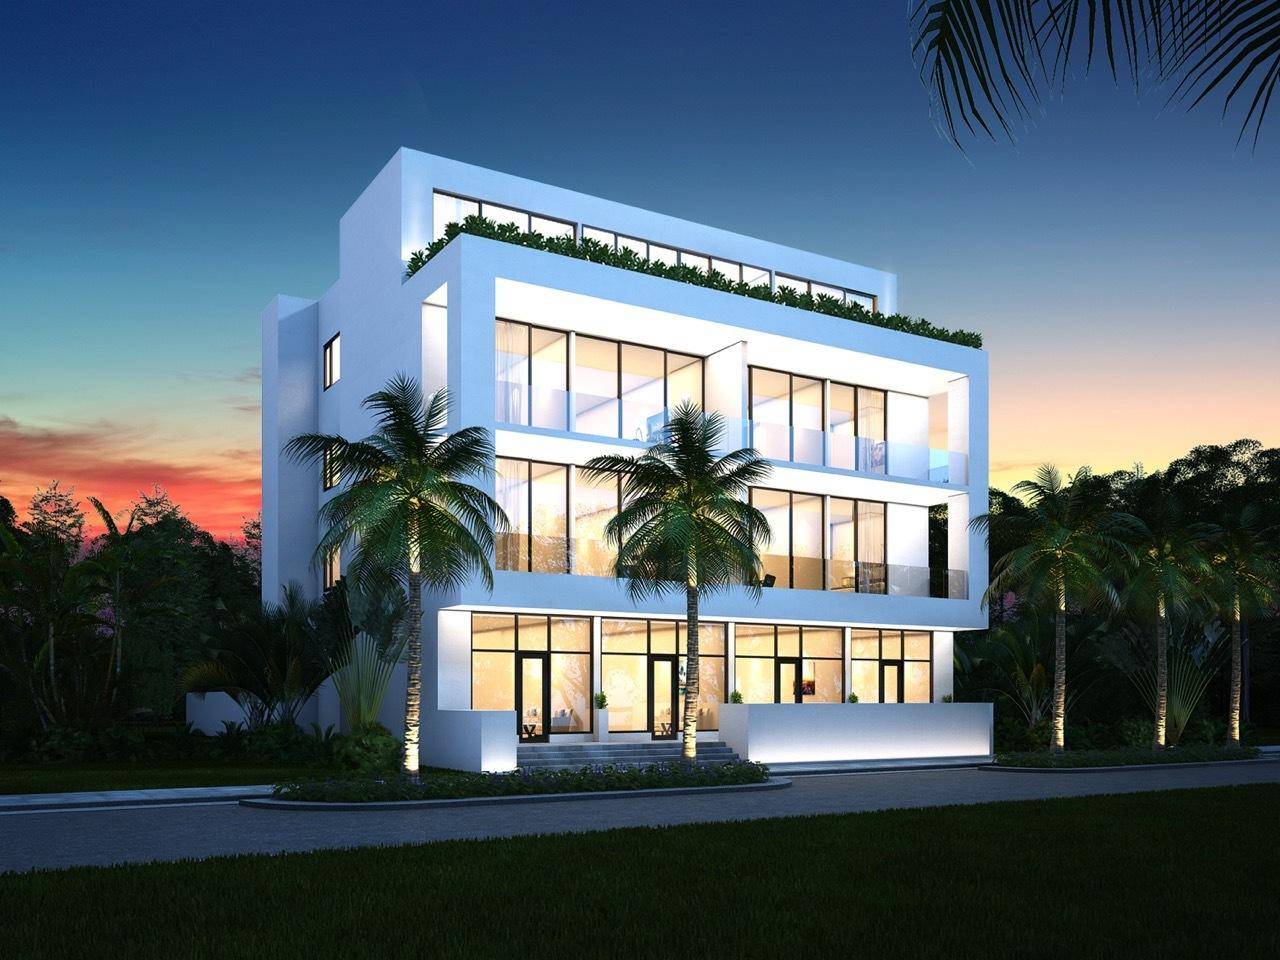 Work Live Play in Delray in this luxurious and modern mixed use condo development within the center of Downtown Delray Beach offering 4 sleek work spaces, 5 contemporary condos with ...